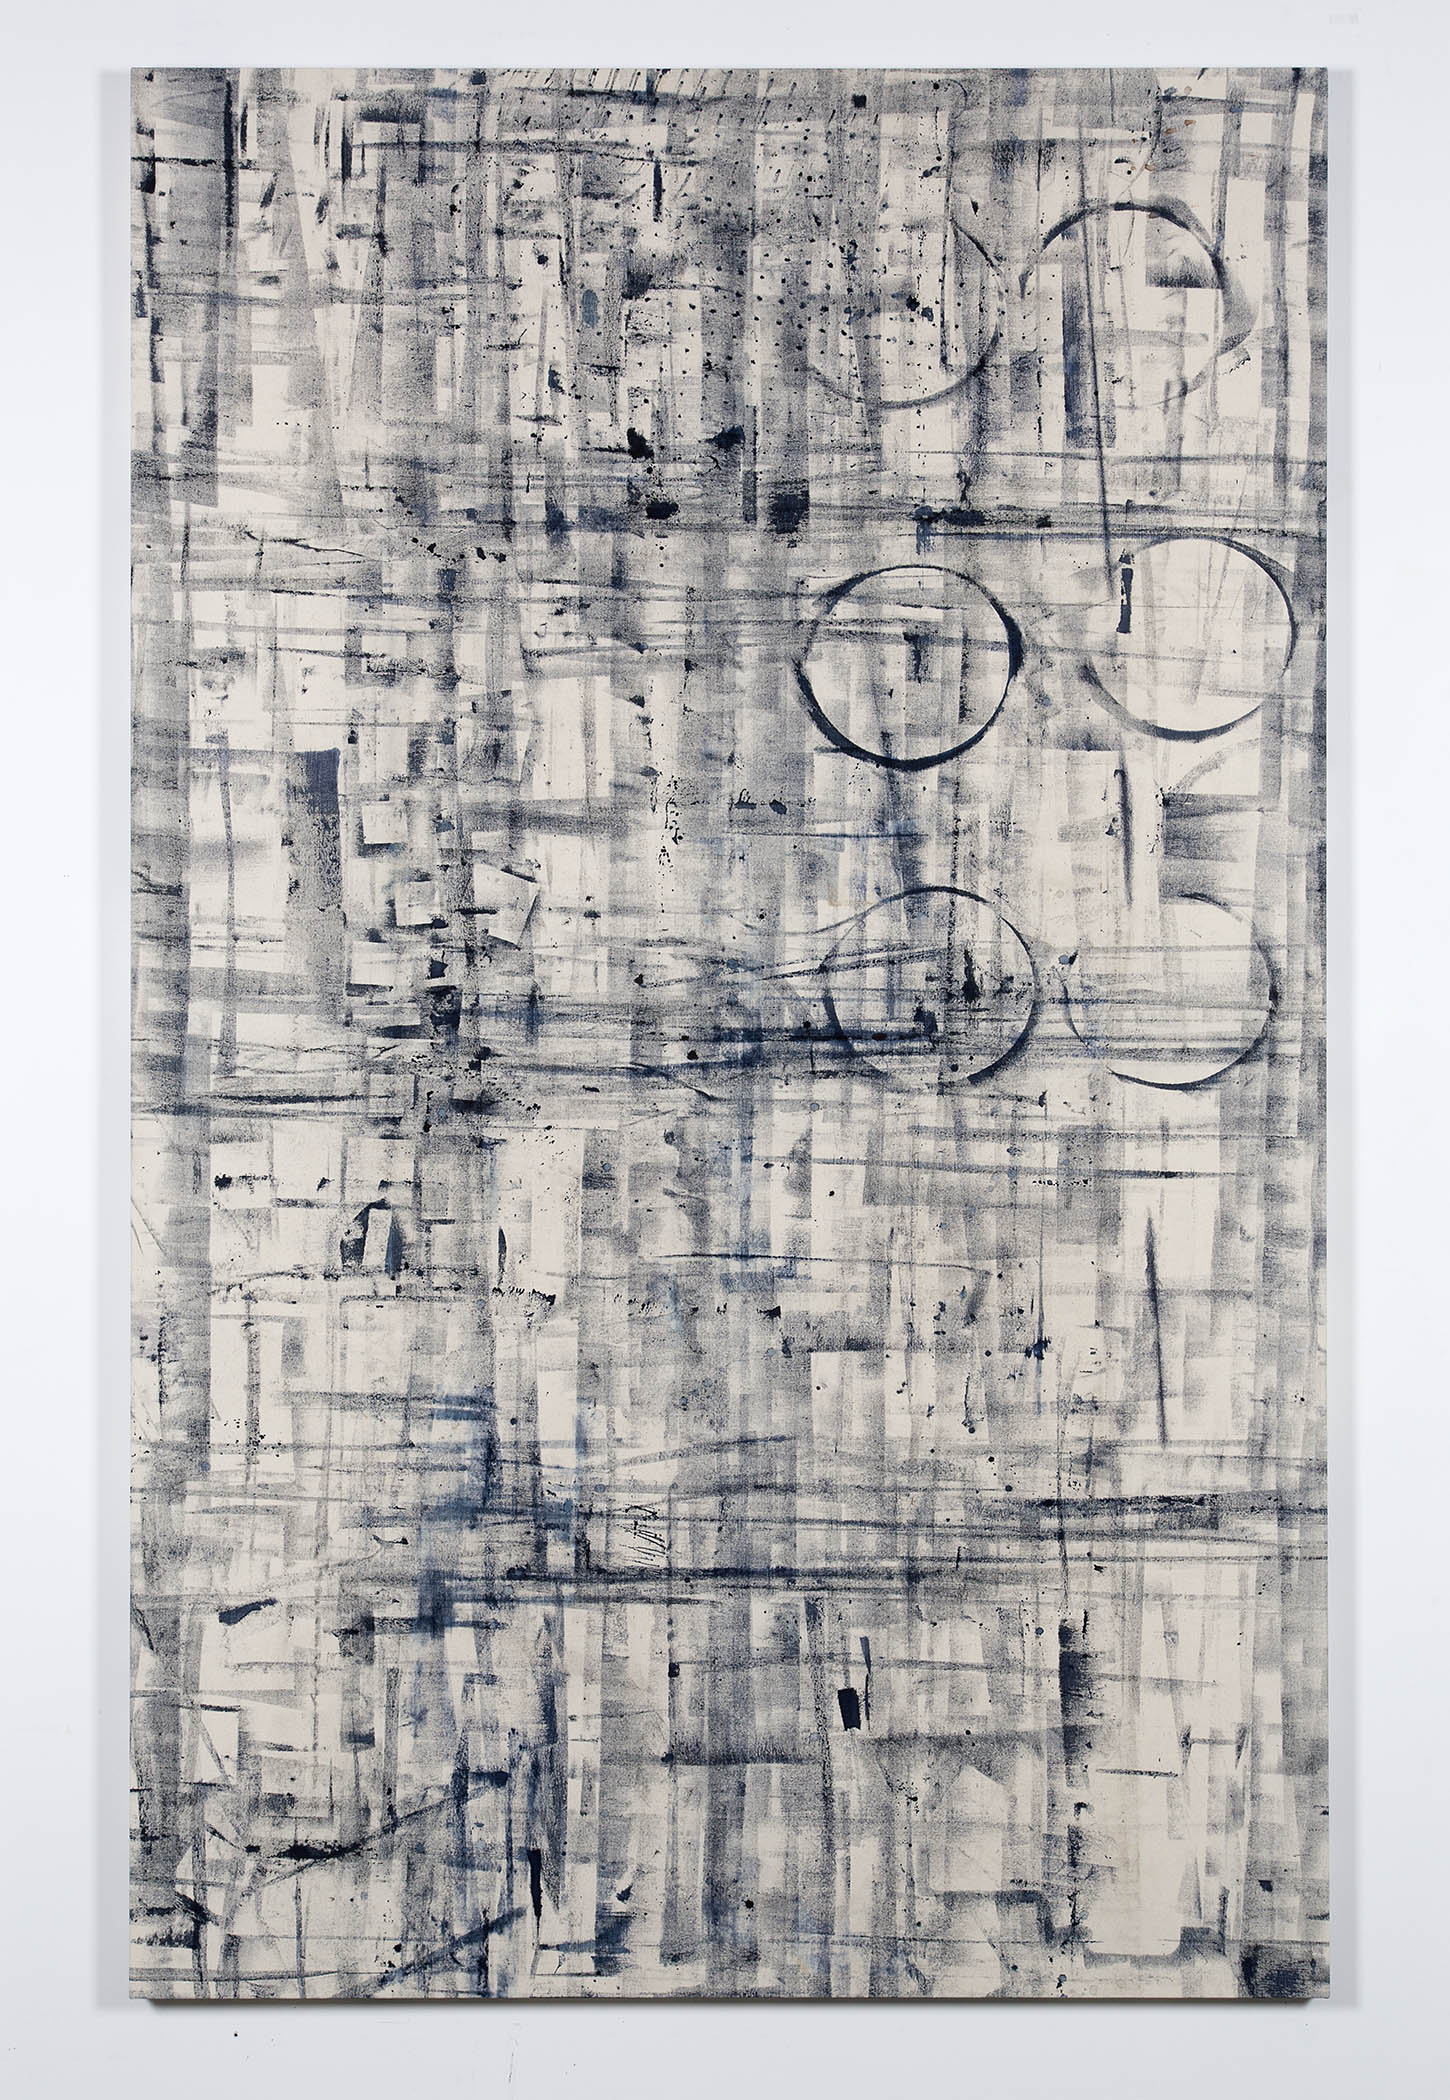   Marginalis (Los Angeles, California, May 1–August 1, 2014)    2014   Cyanotype chemistry on canvas  89 x 55 inches   Cyanotype Paintings, 2013–2015     